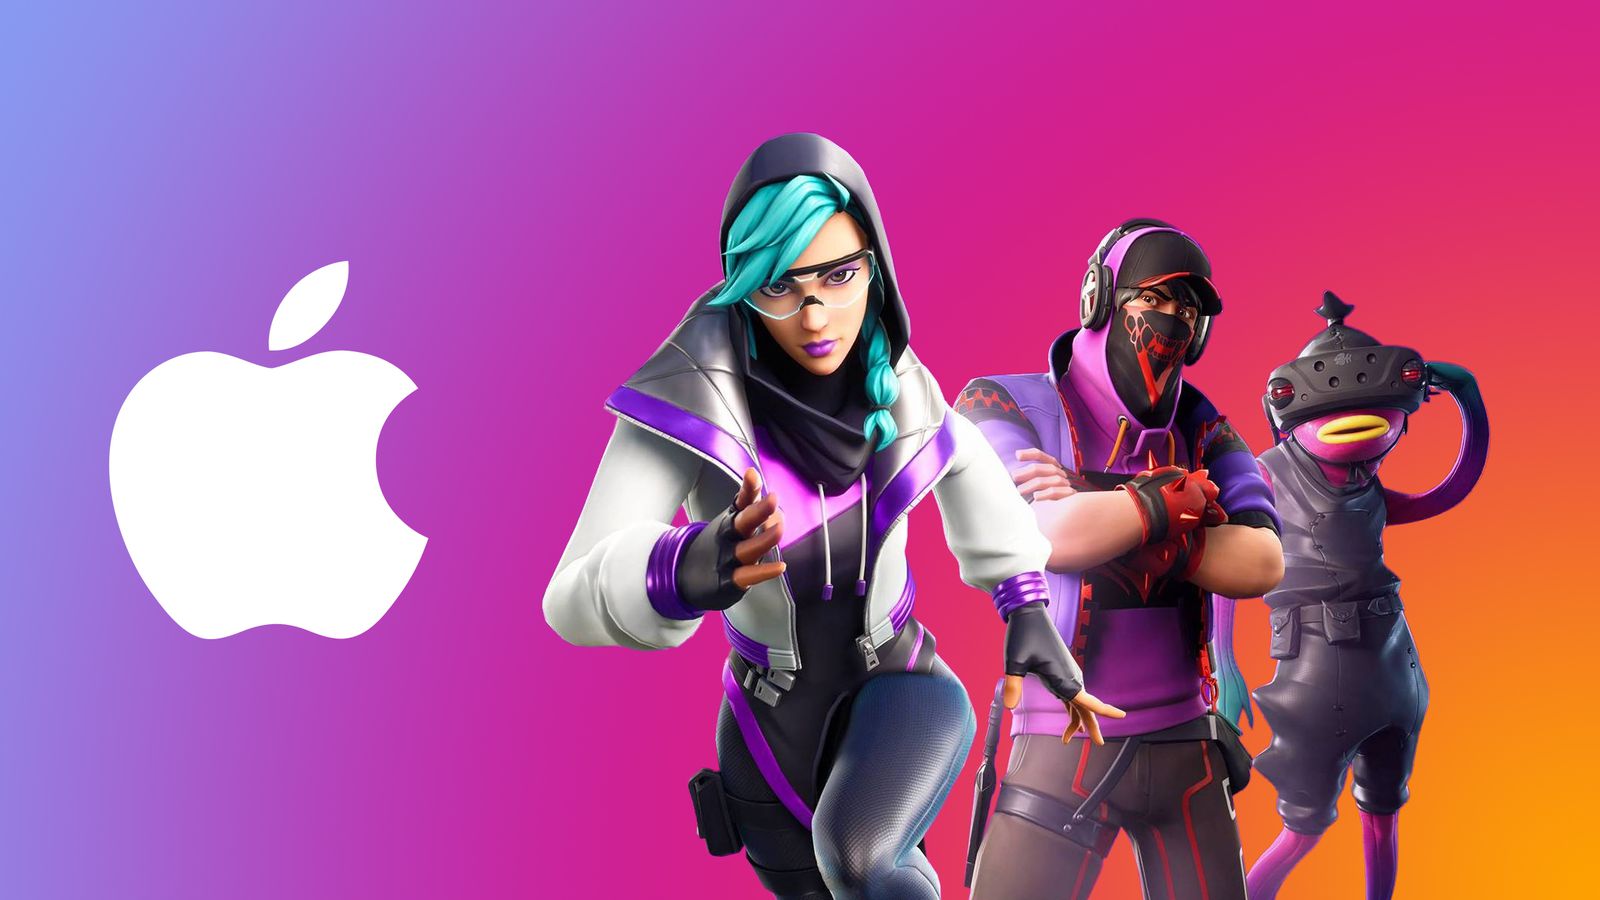 Apple scores legal win over Epic in Fortnite lawsuit: What you need to know  - CNET